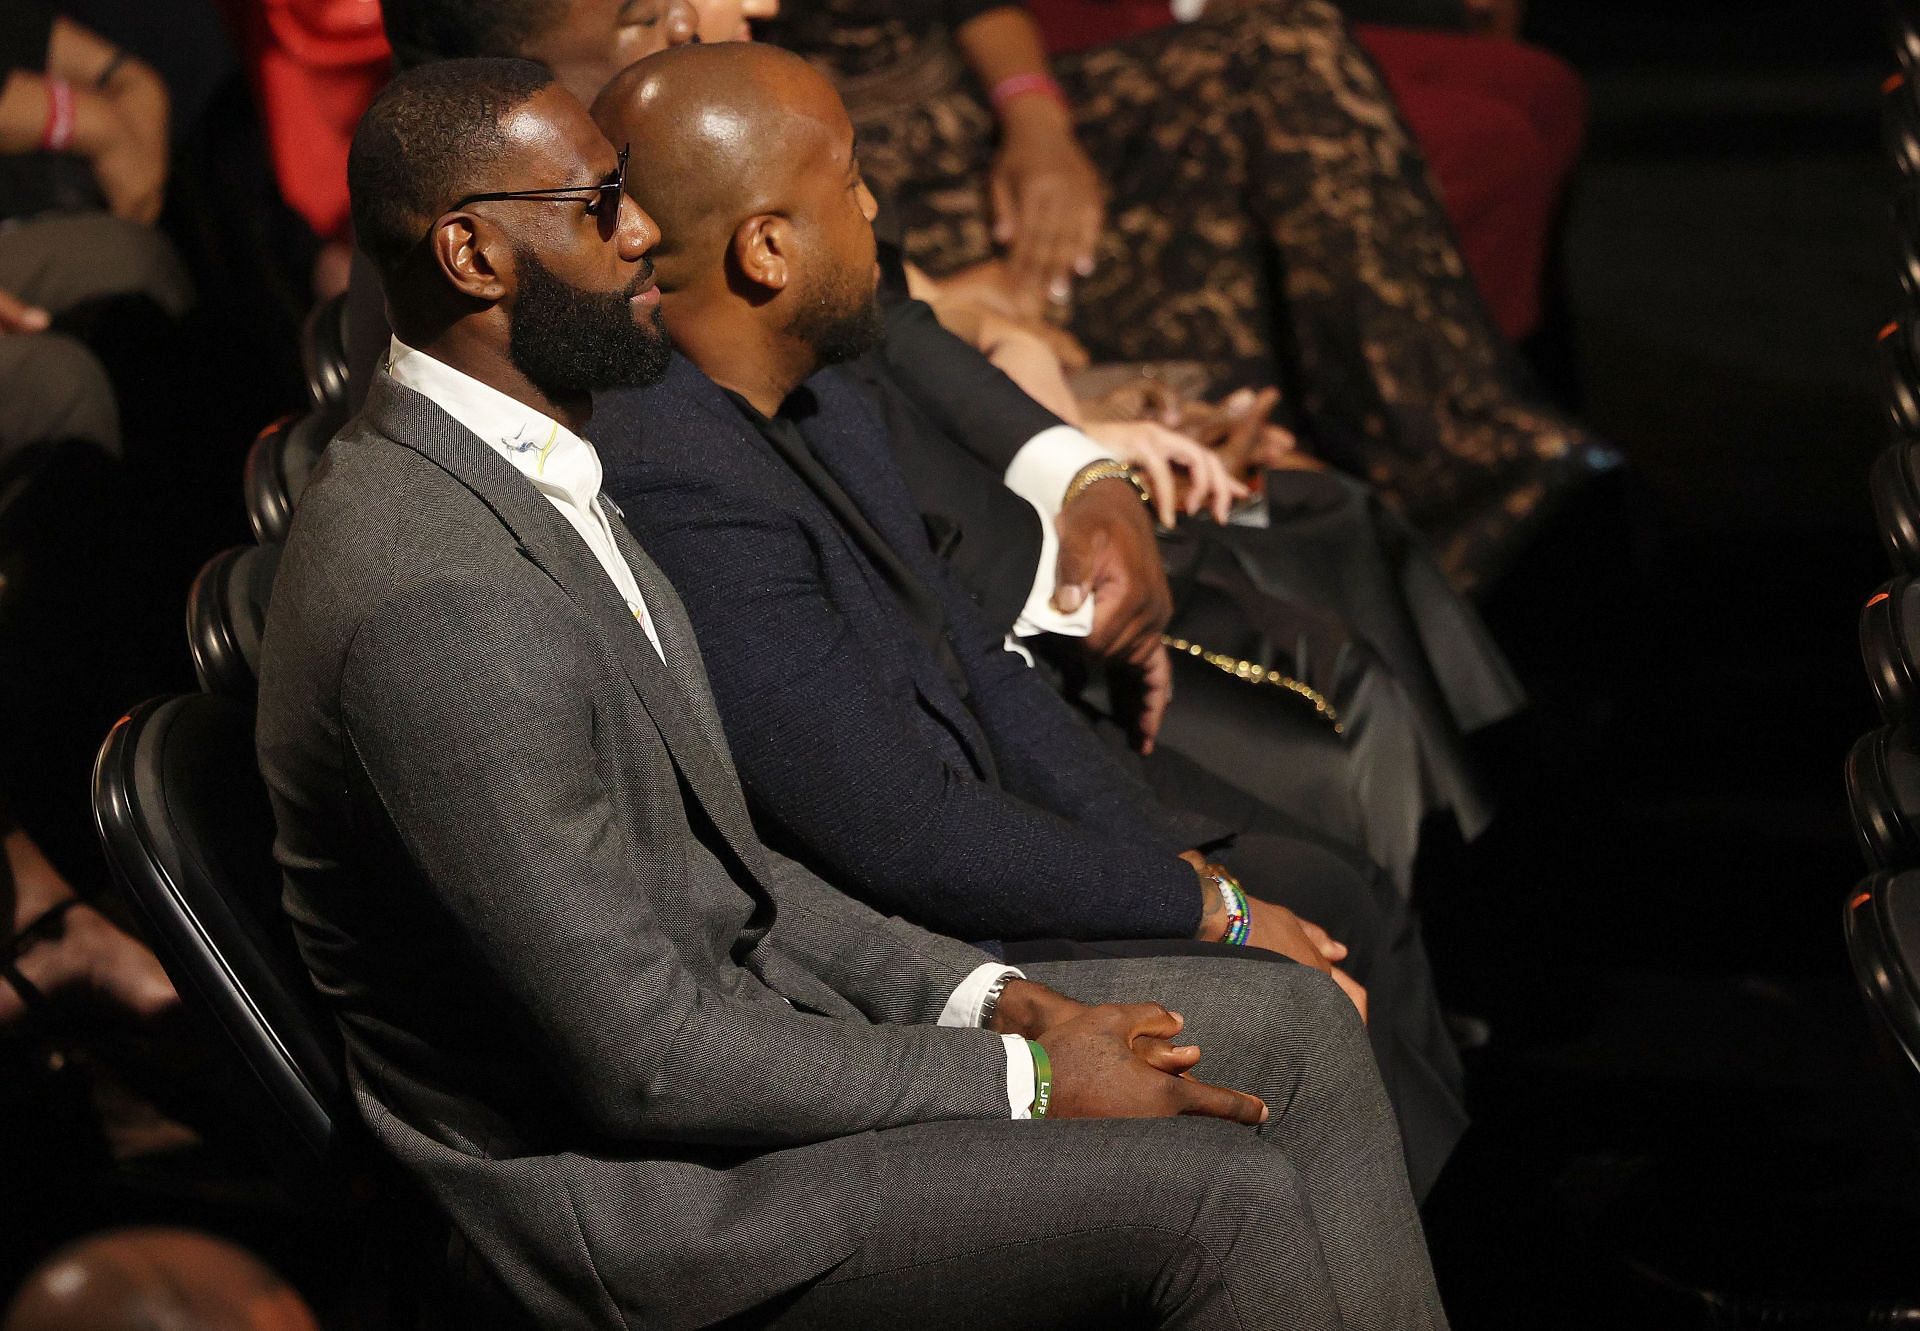 LA Lakers star LeBron James at the Basketball Hall of Fame Enshrinement Ceremony